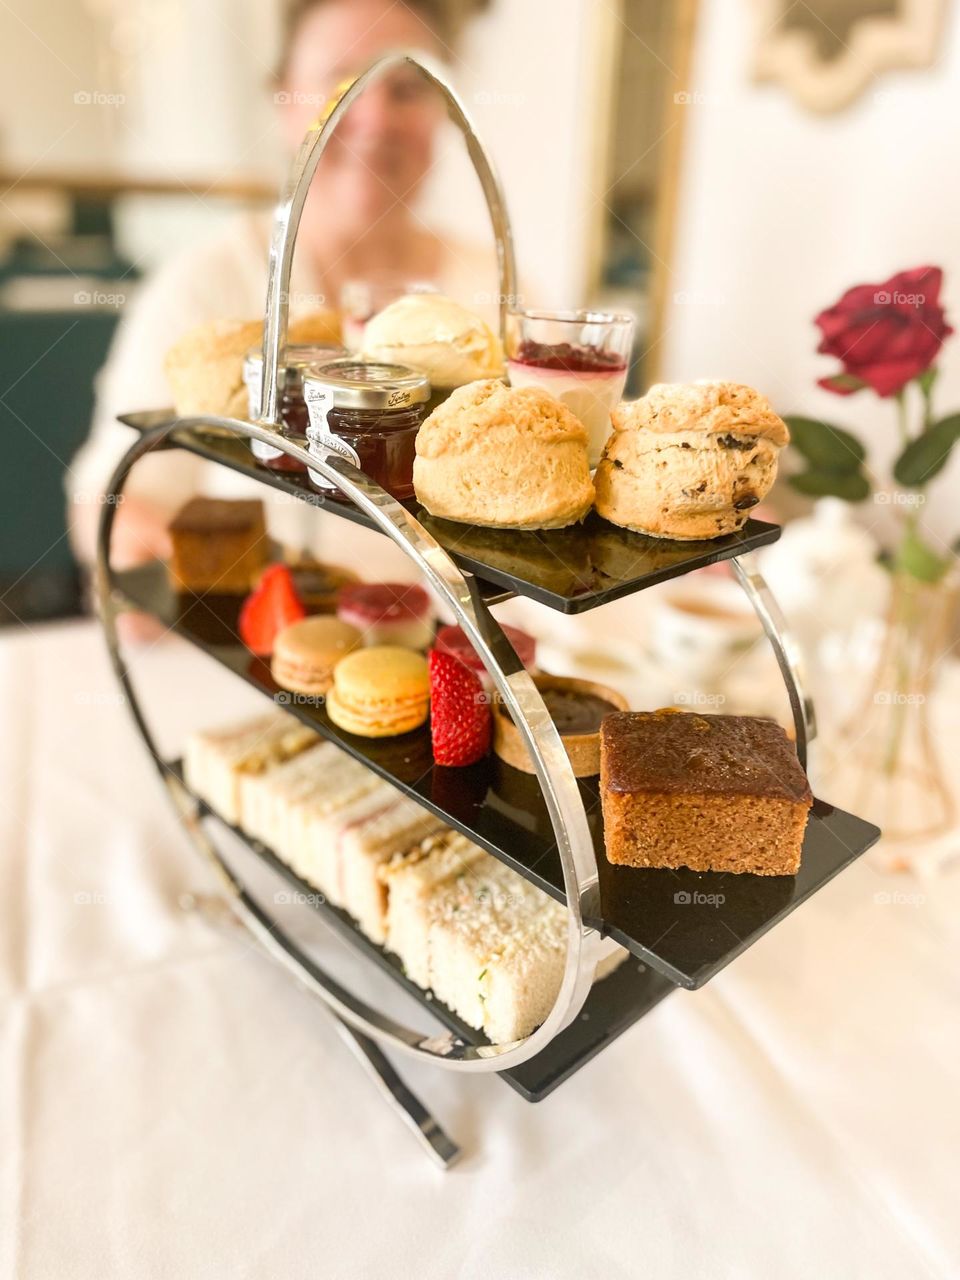 Afternoon tea is my favourite weekend treat! Beautiful cakes and patisserie with fresh sandwiches and scones!